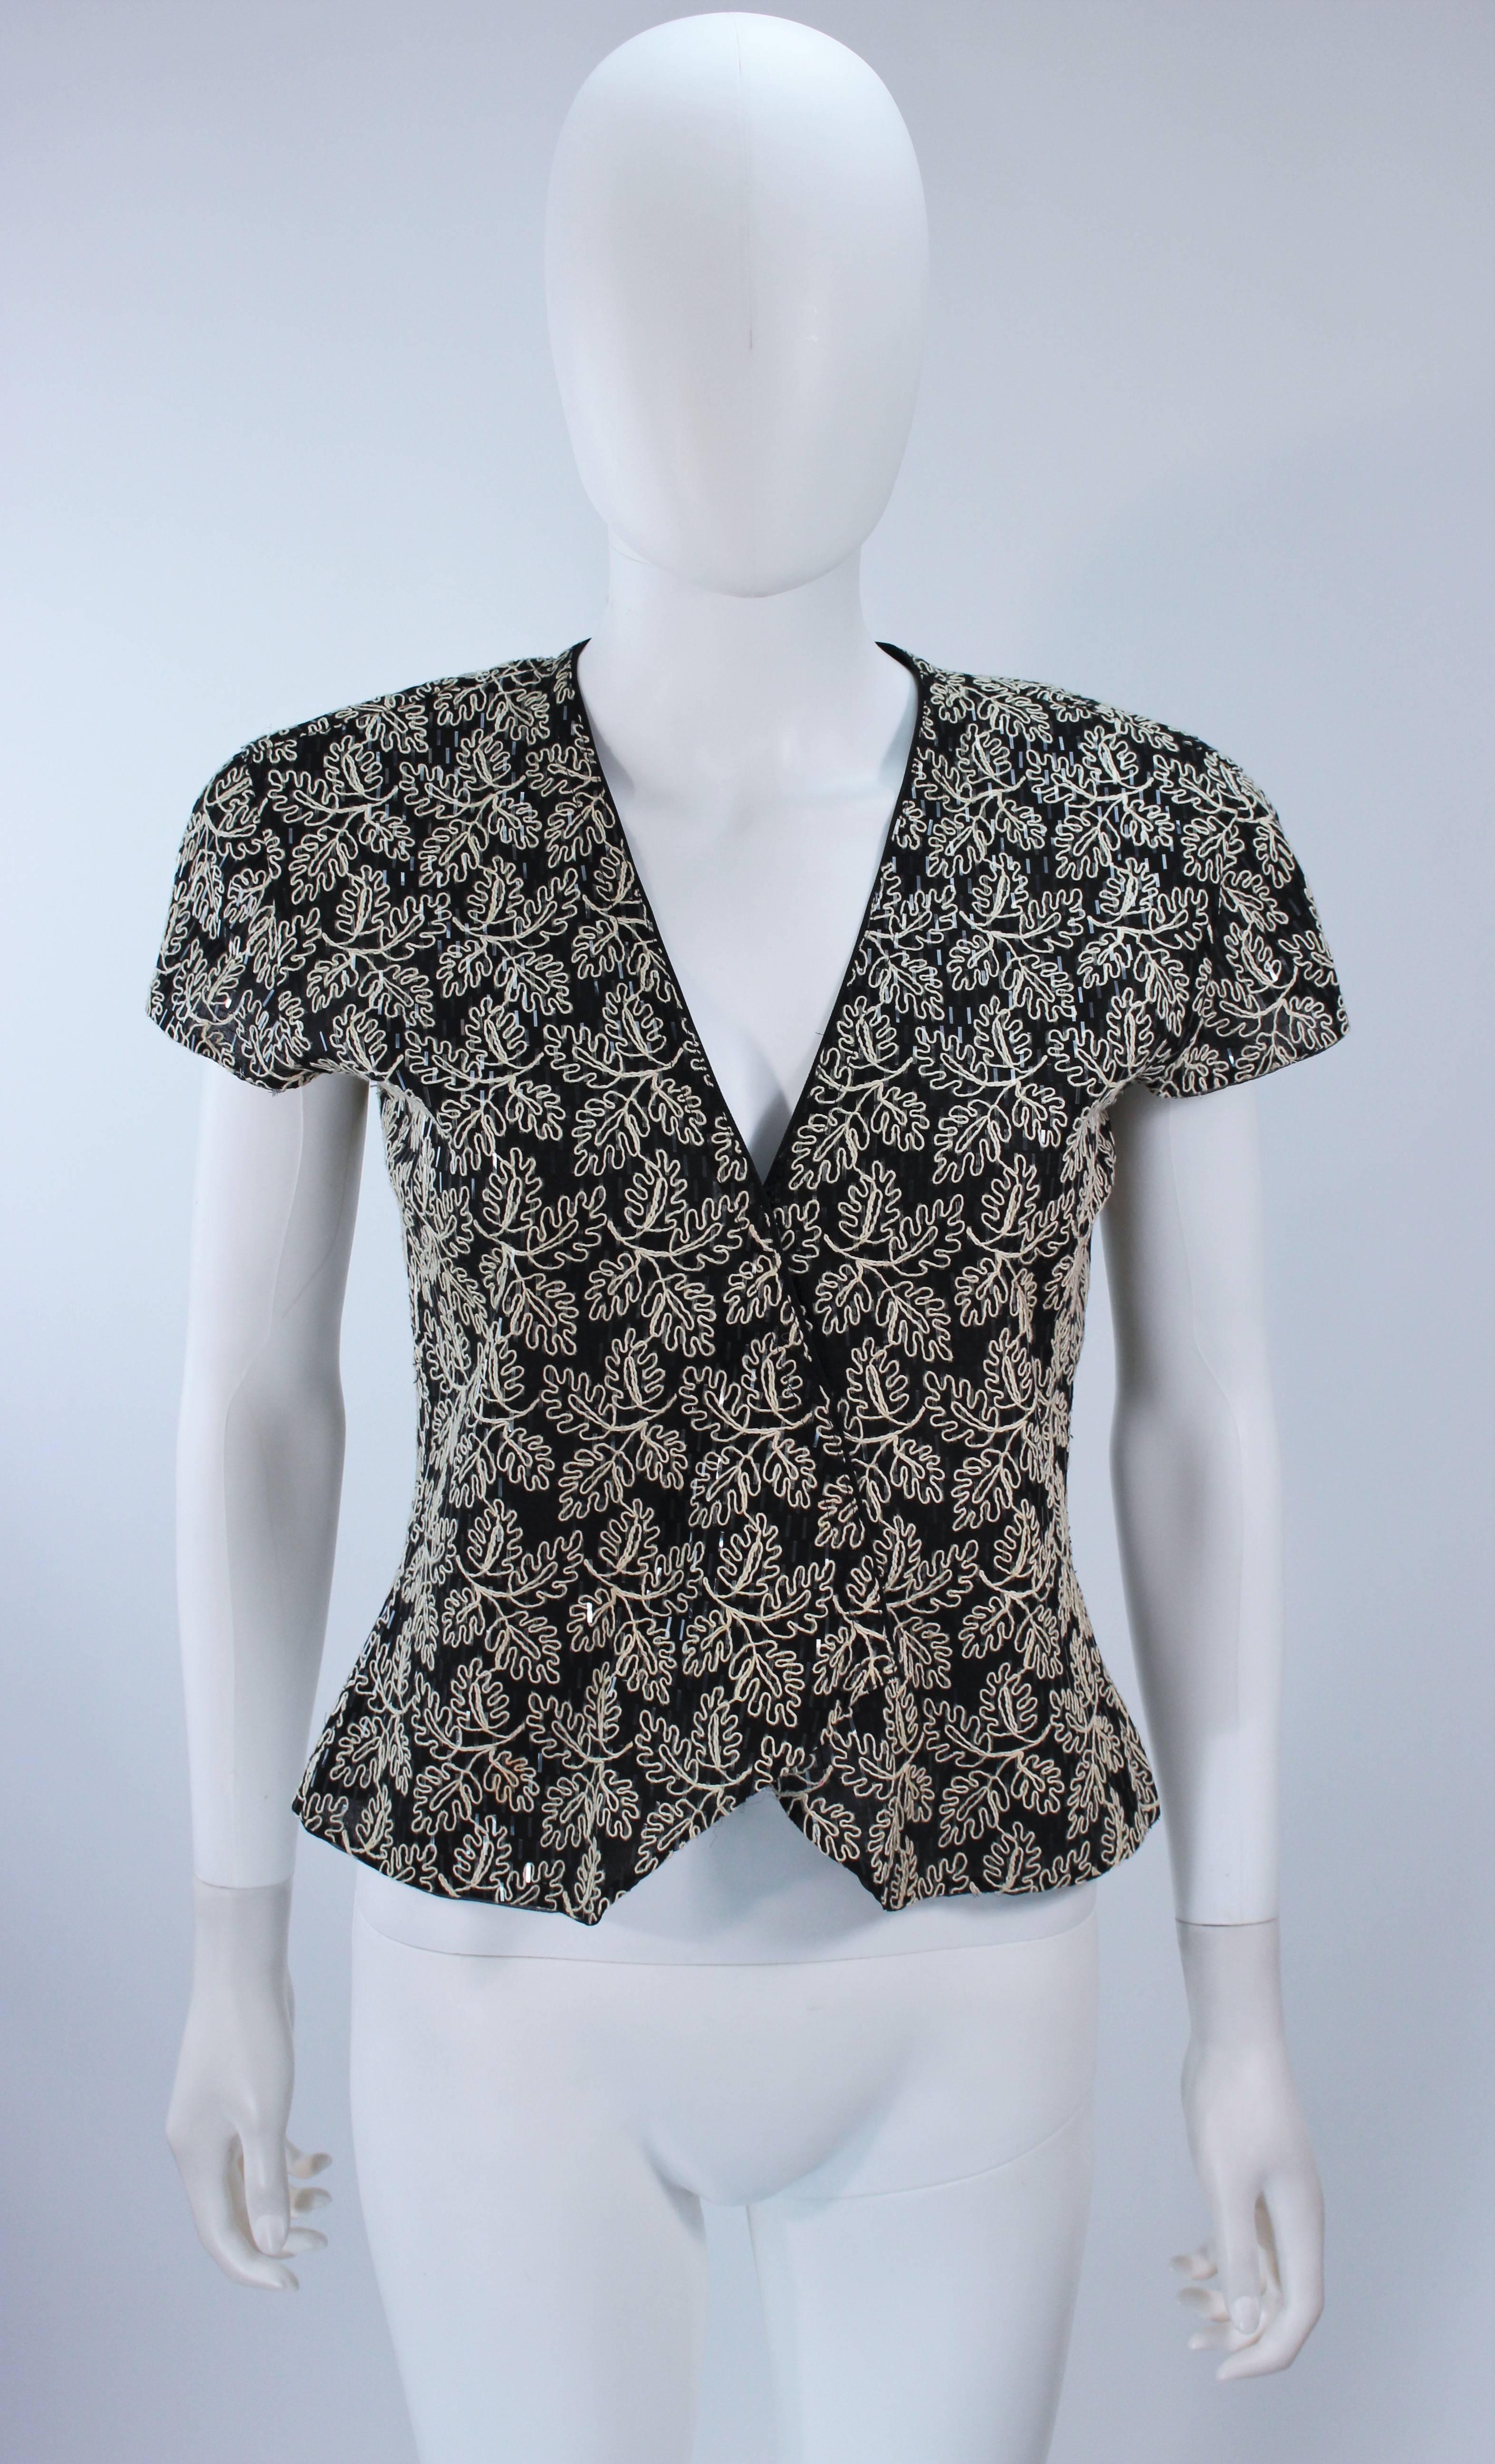  This Giorgio Armani  jacket is composed a black and white cotton with a floral motif and sequin applique. There are center front snap closures and shoulder pads. In excellent vintage condition. 

  **Please cross-reference measurements for